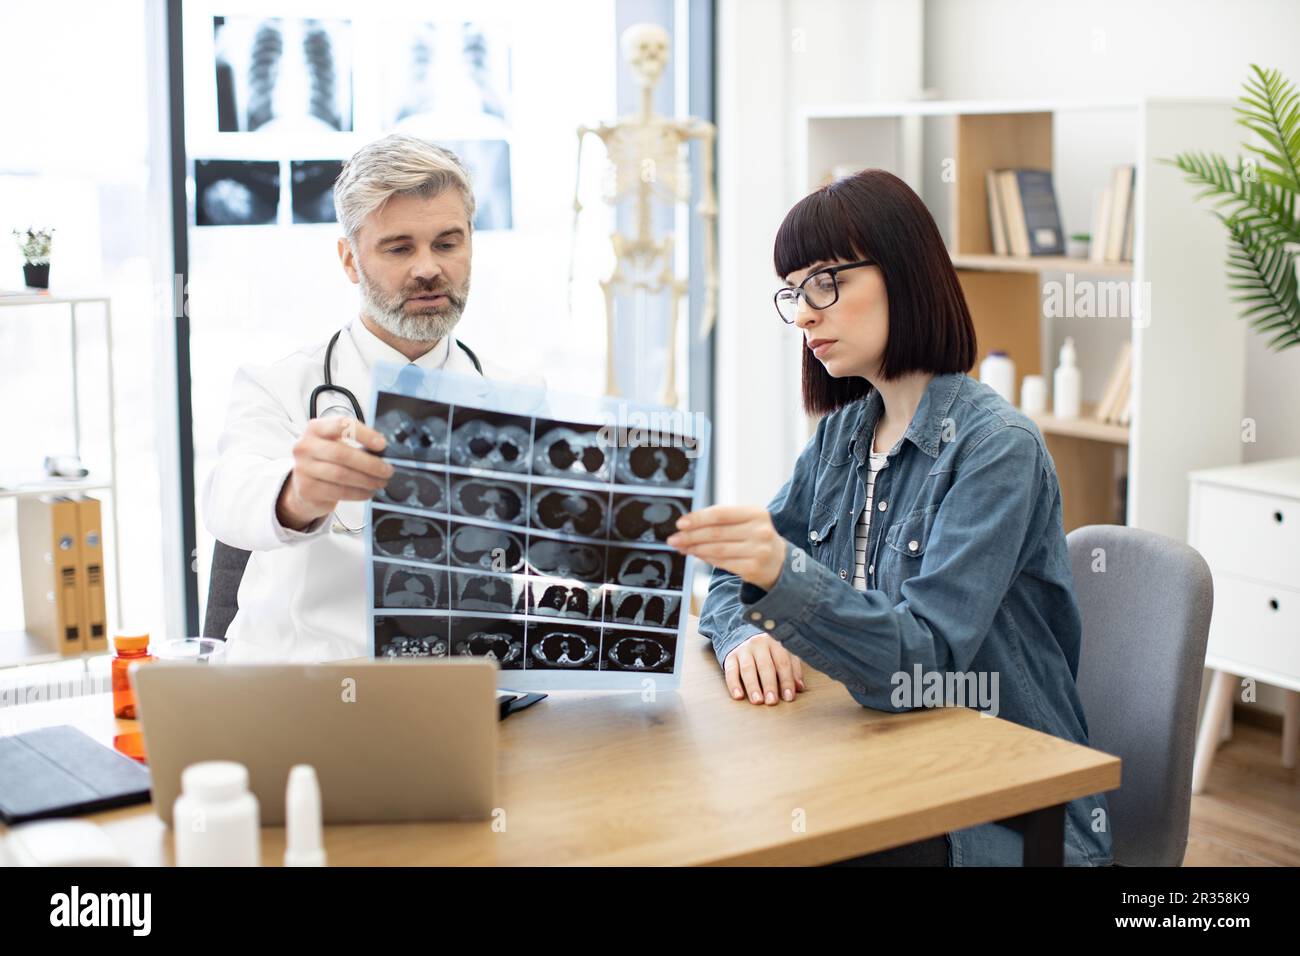 Mindful gray-haired male in lab coat holding MRI scans while brunette lady sitting next to him at desk in hospital. Family doctor examining diagnostic test results while developing treatment plan. Stock Photo